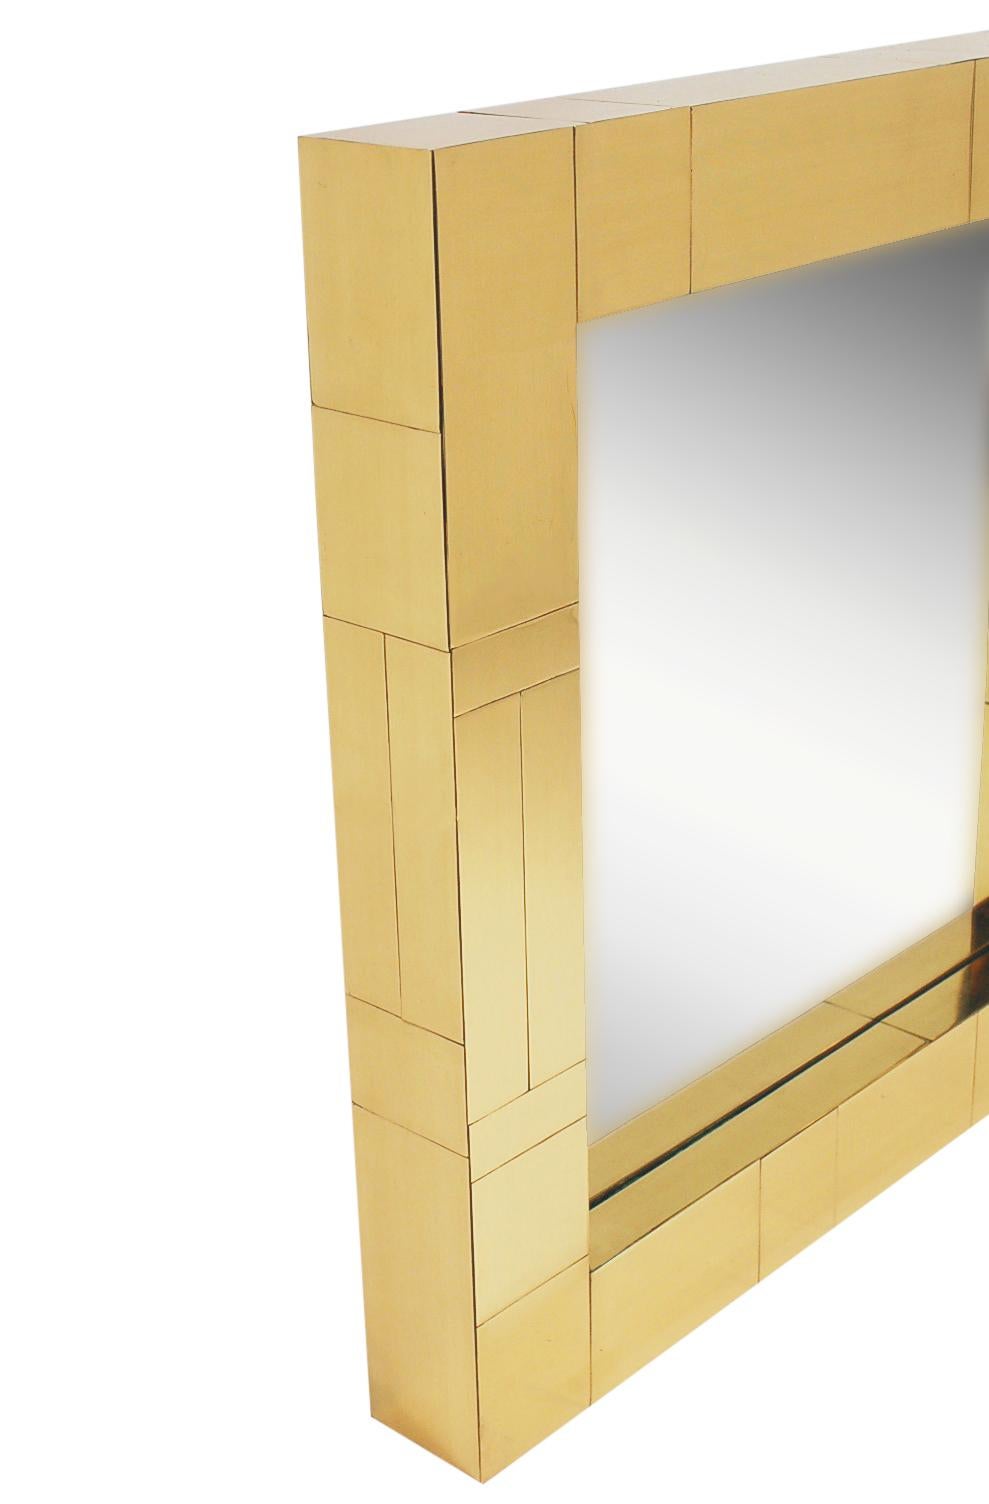 An incredible design combination, a cityscape wall shelf and mirror designed by Paul Evans in the 1970's. The set features fine heavy construction with brass clad patchwork design. Includes two L shaped wall brackets, wall mirror, and heavy clear